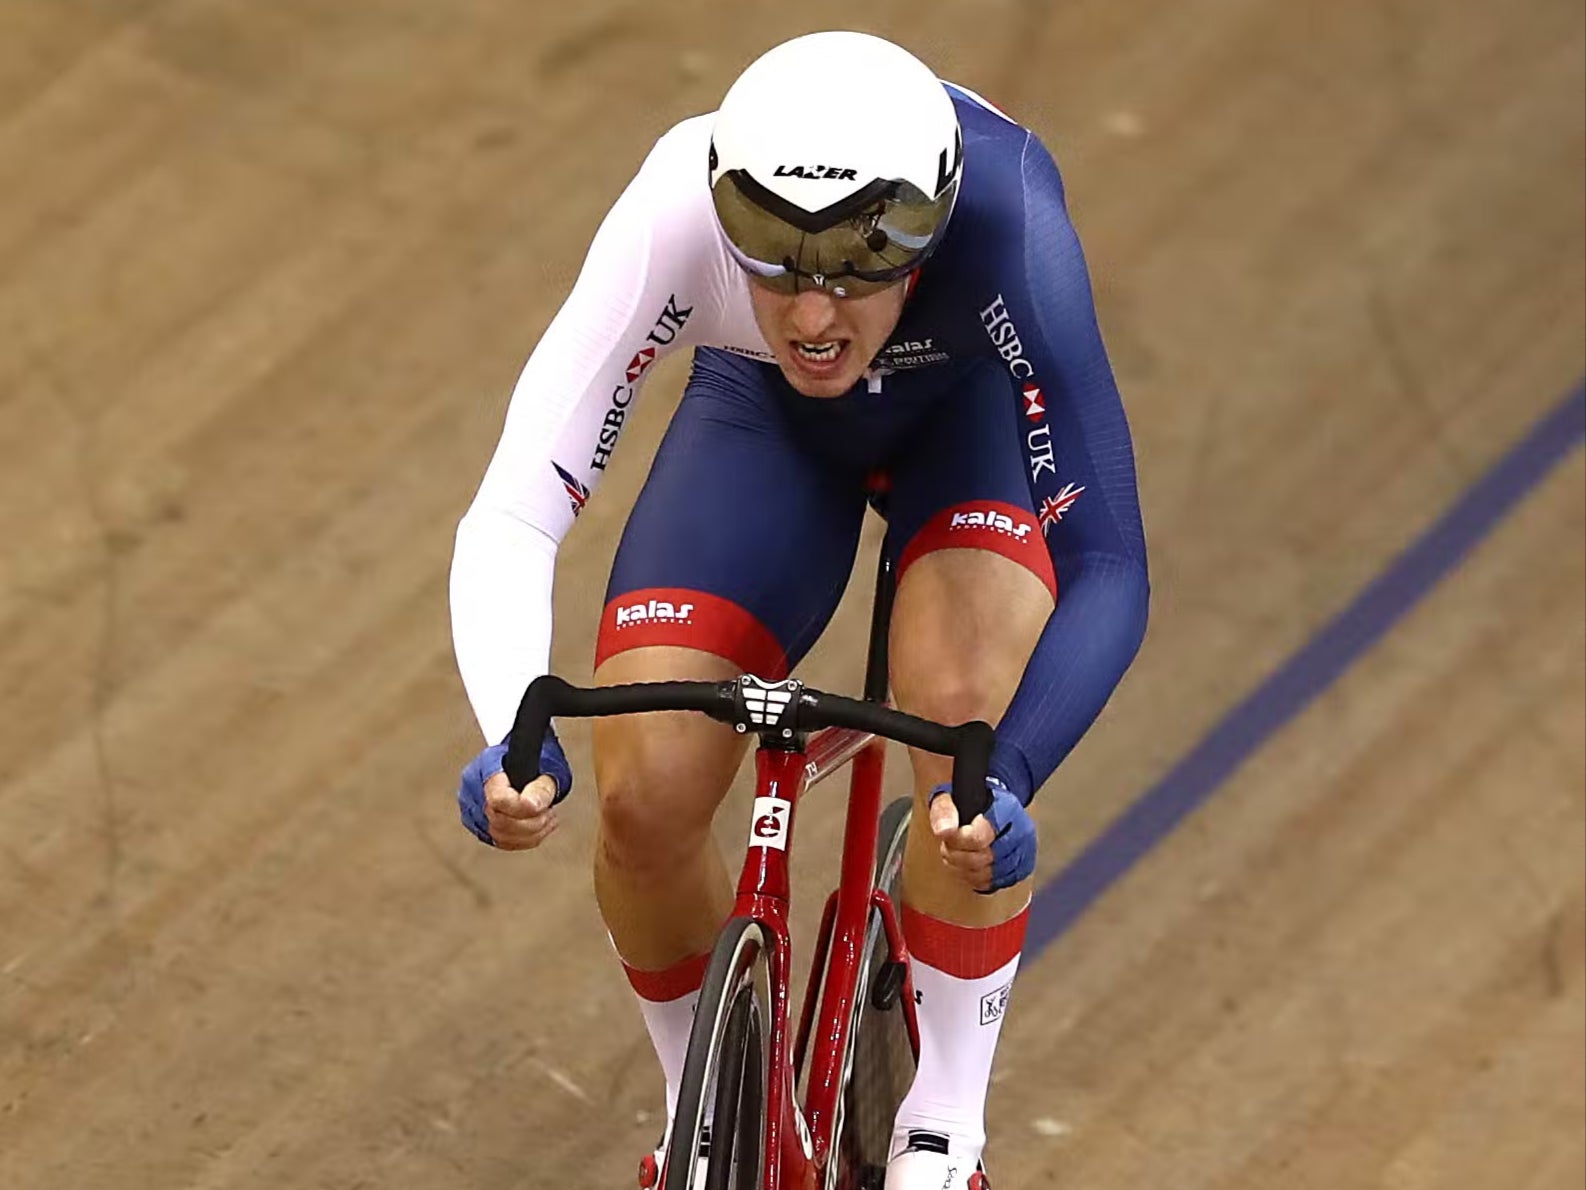 Oliver Wood came eighth in the omnium in Munich (John Walton/PA).